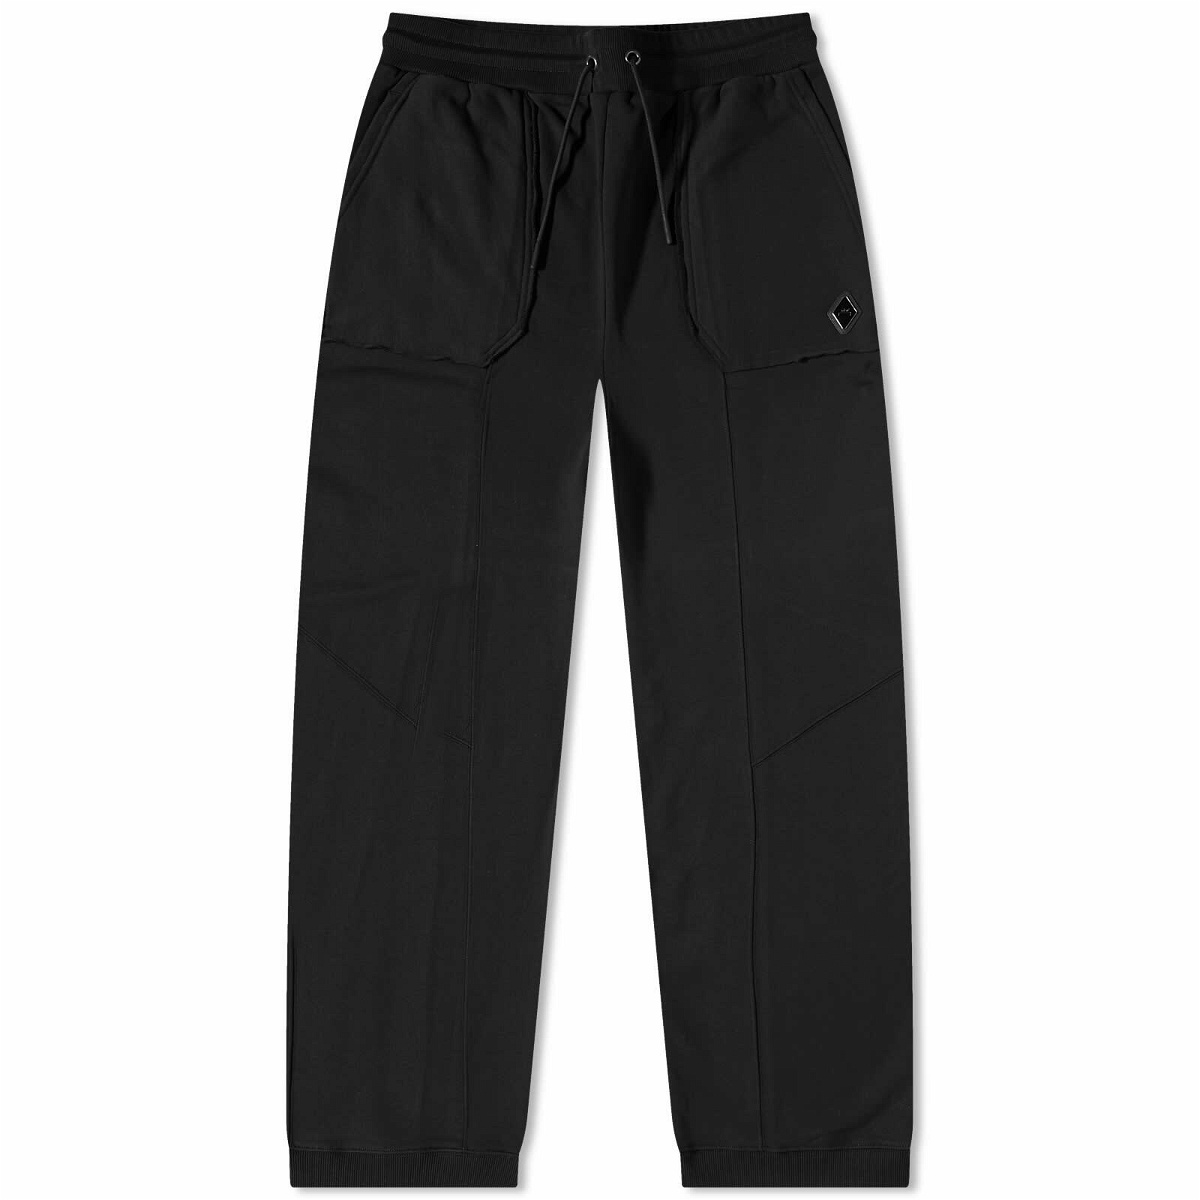 A-COLD-WALL* Men's Works Jersey Pants in Black A-Cold-Wall*